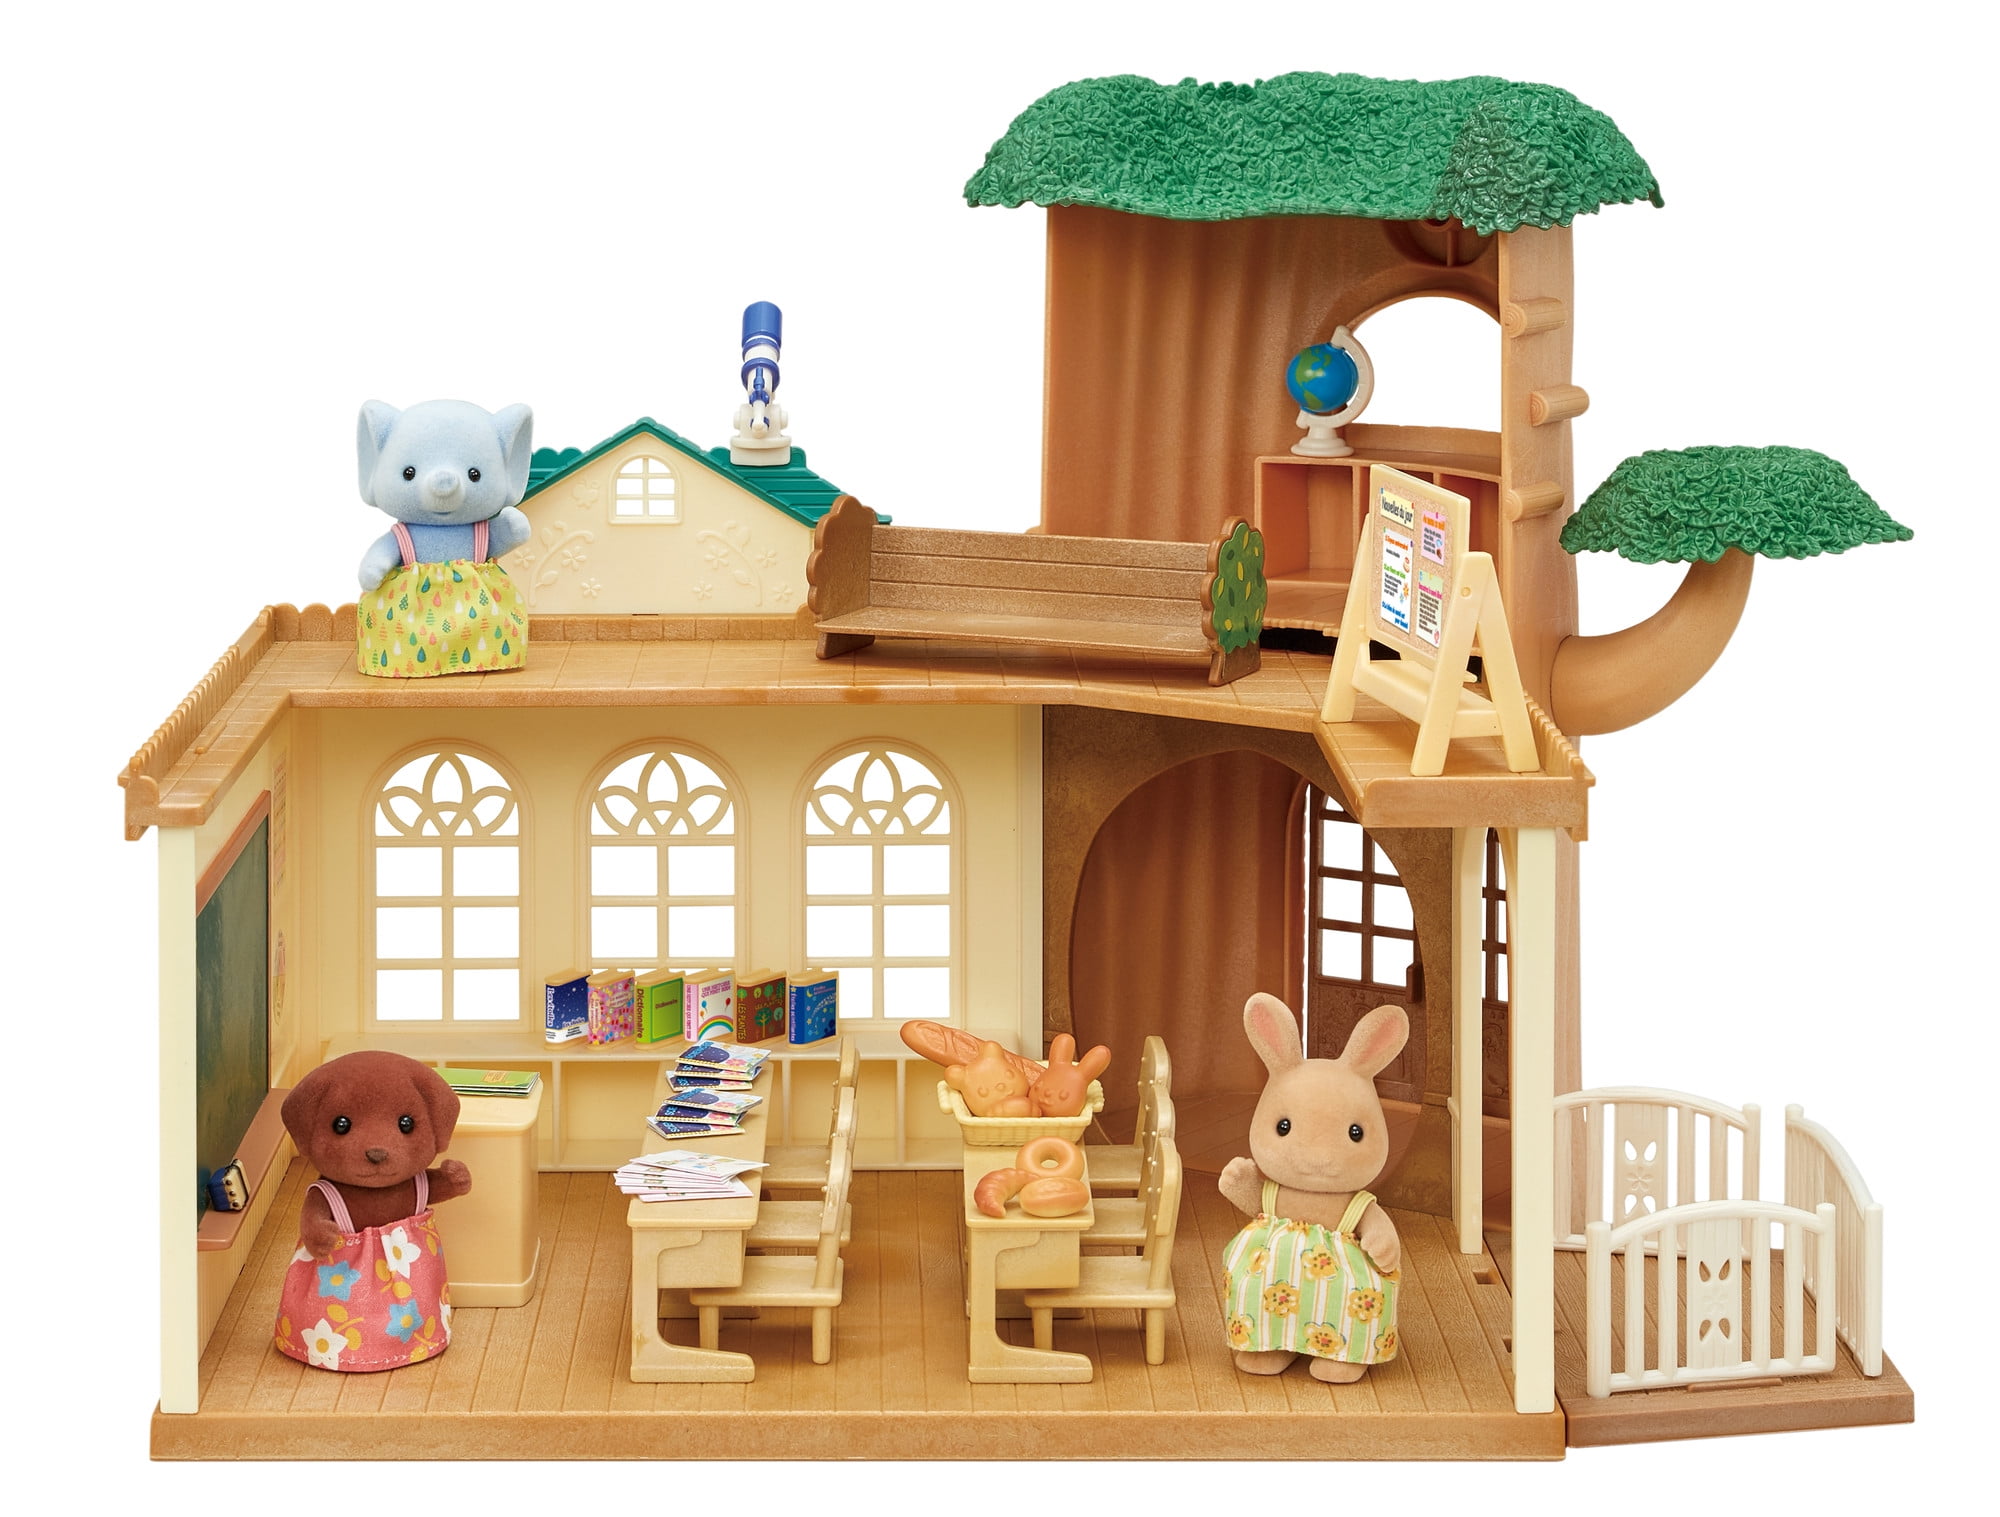 Sylvanian Families Calico Critters Biscuits & Dessert Set 